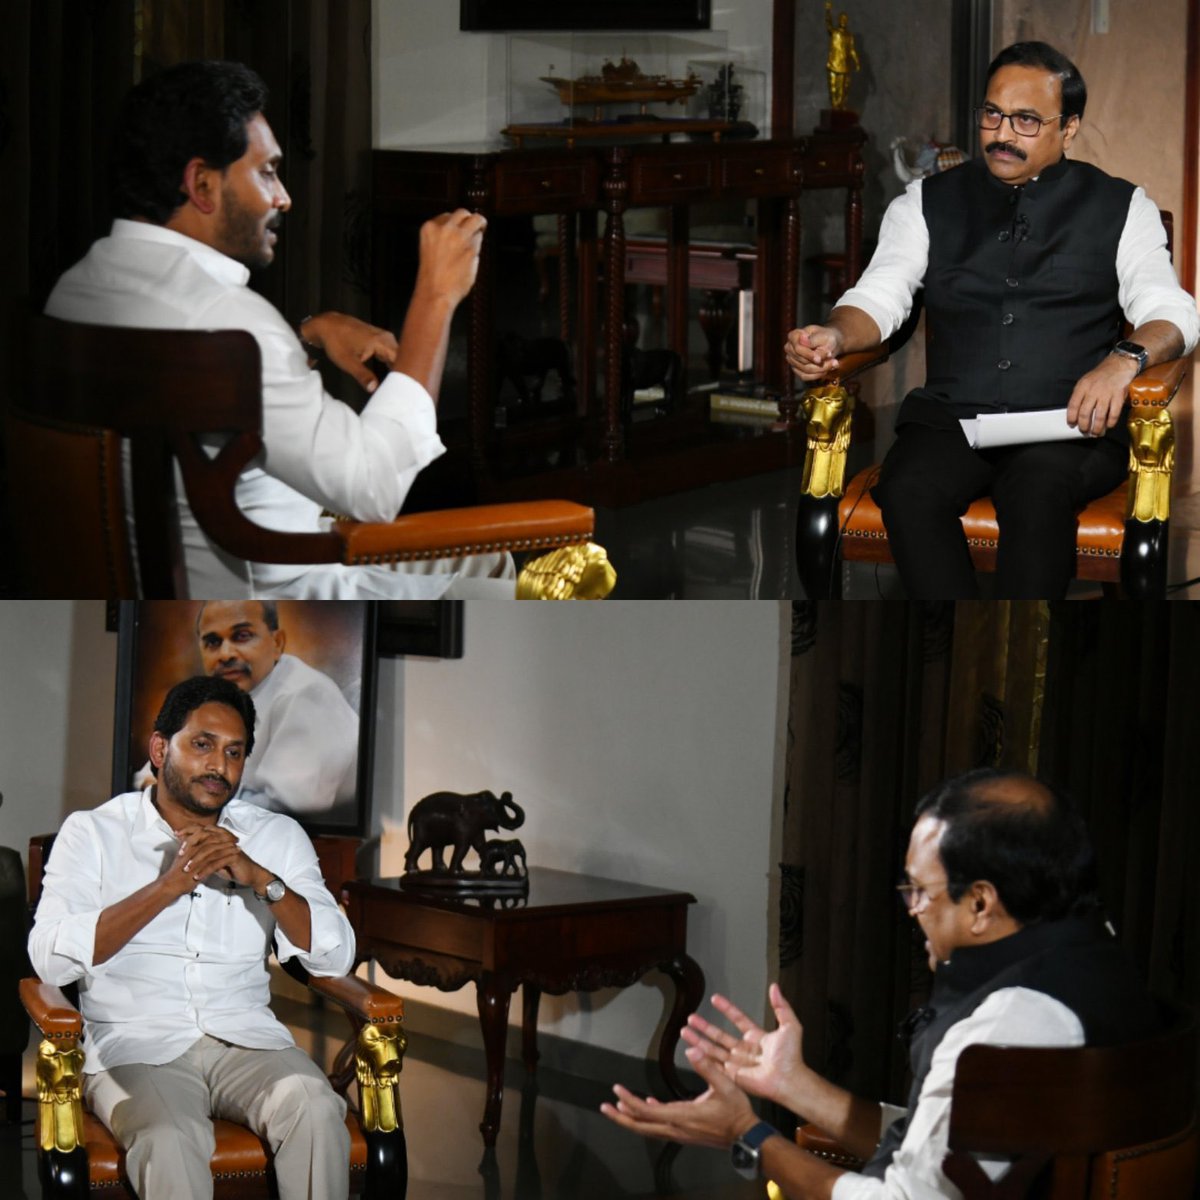 #YSJaganOnTV9 Today At 8PM !! Most Anticipated Interview of this election Season….Might Smash Youtube & Trp Records!! Political Experts Feel this Interview will set the tone for Elections!!